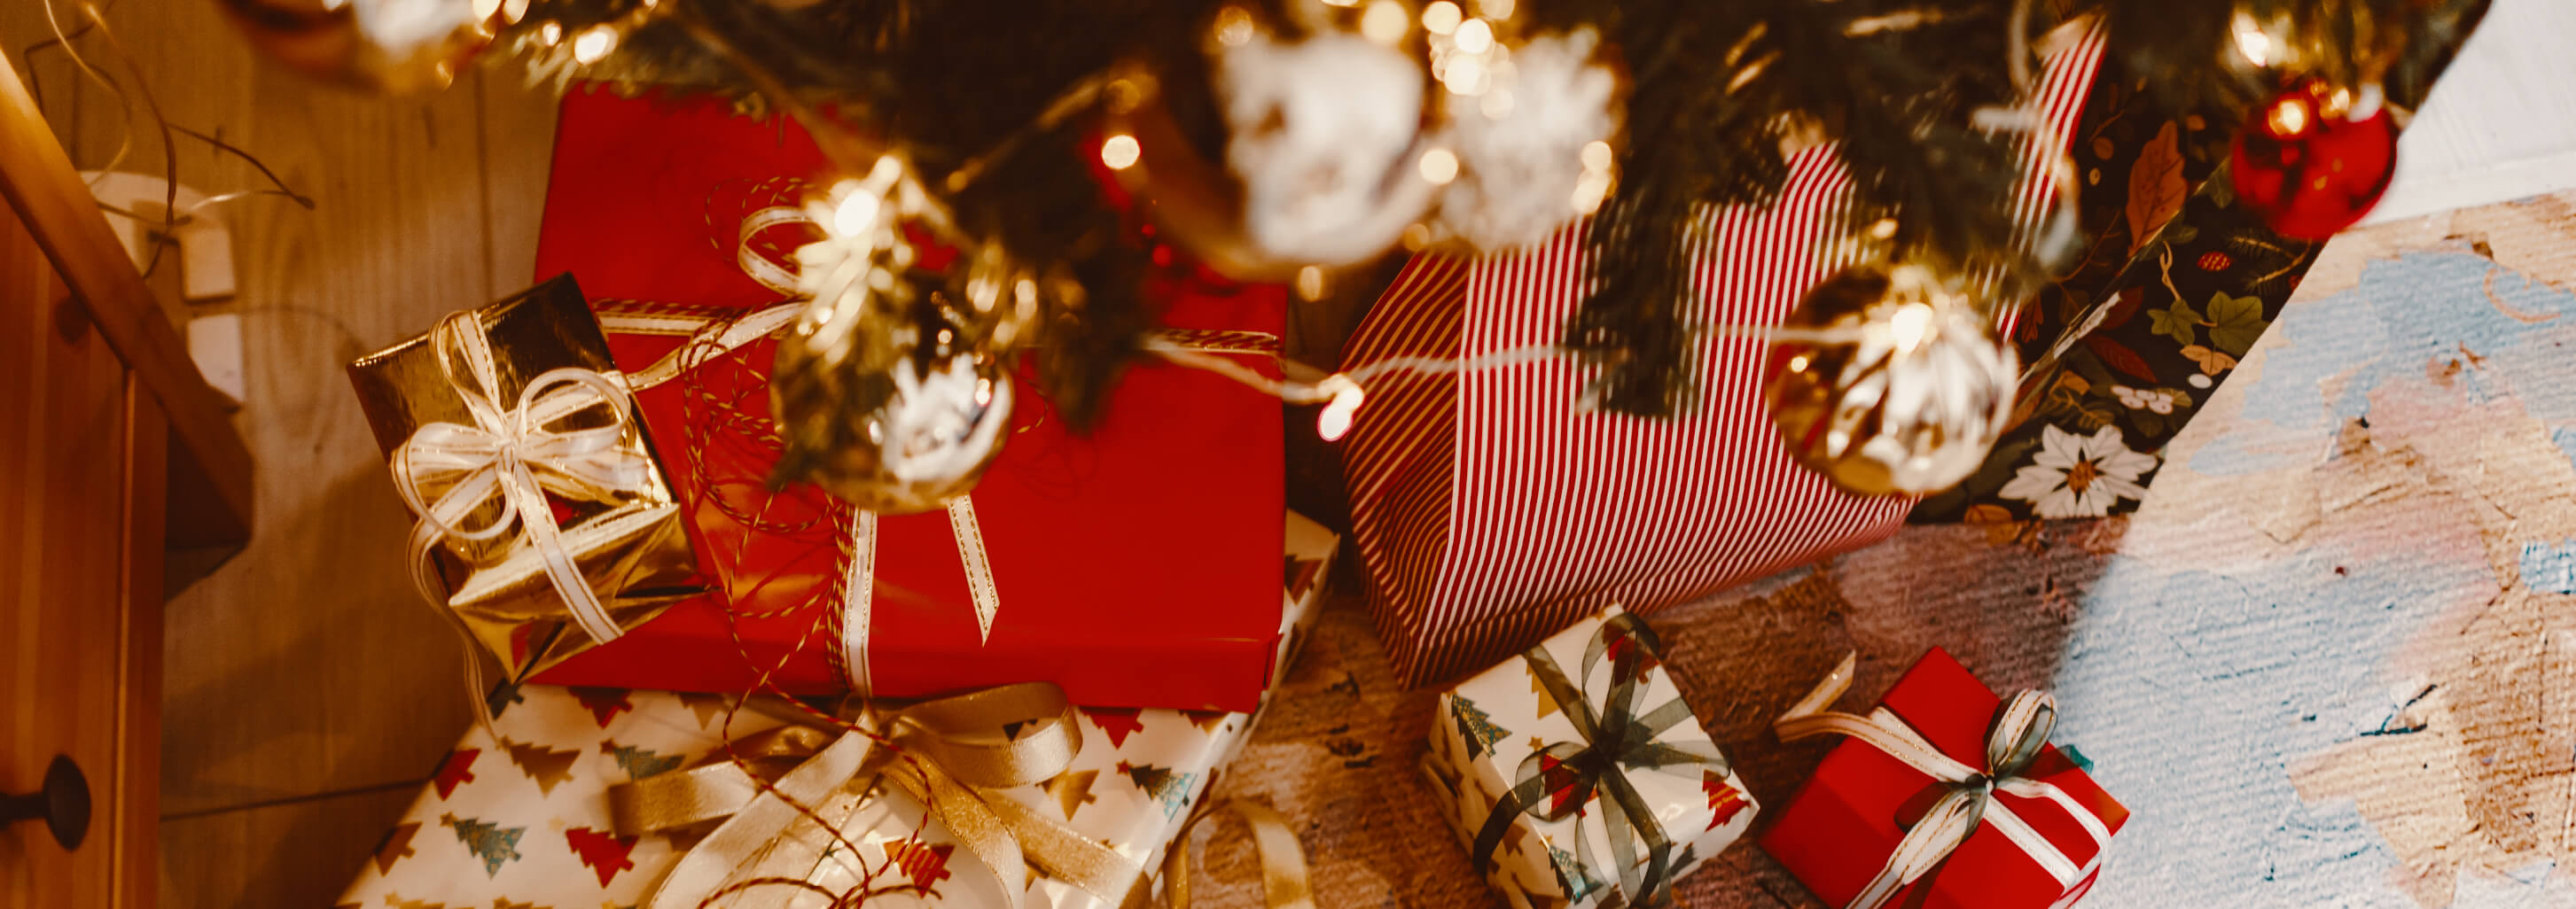 Tips for the best Christmas gifts